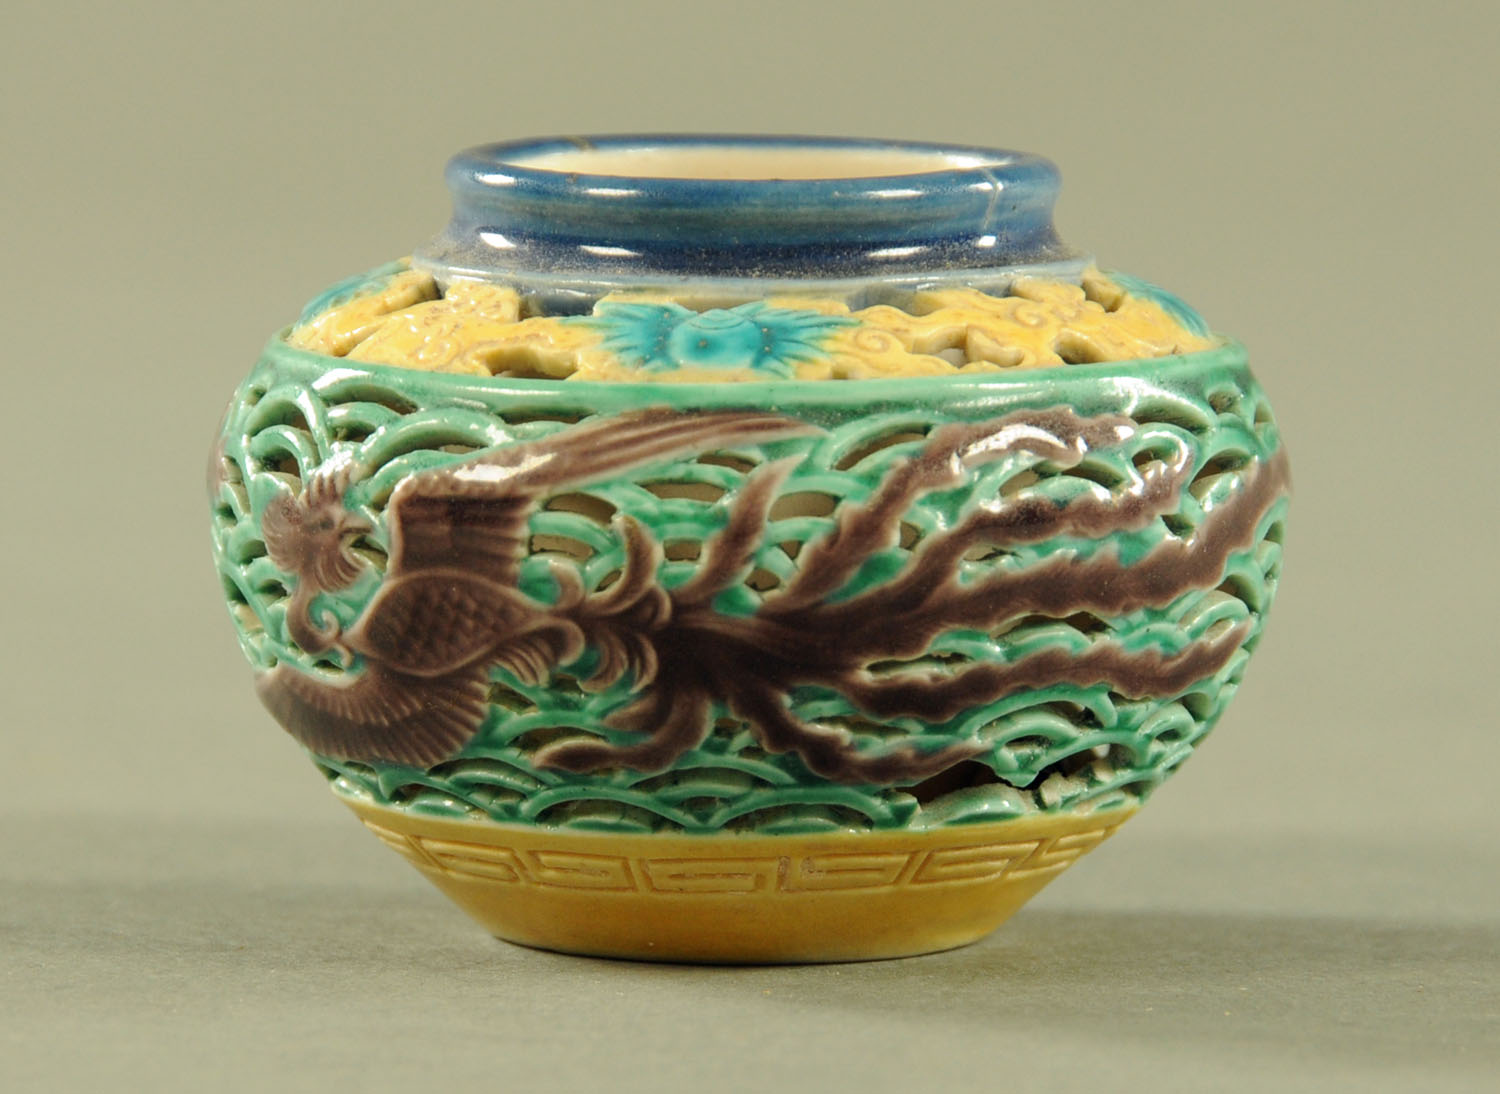 A Japanese ware reticulated pot, decorated with a dragon and marked Makuso Hozan Yokohama 1910. - Image 2 of 3